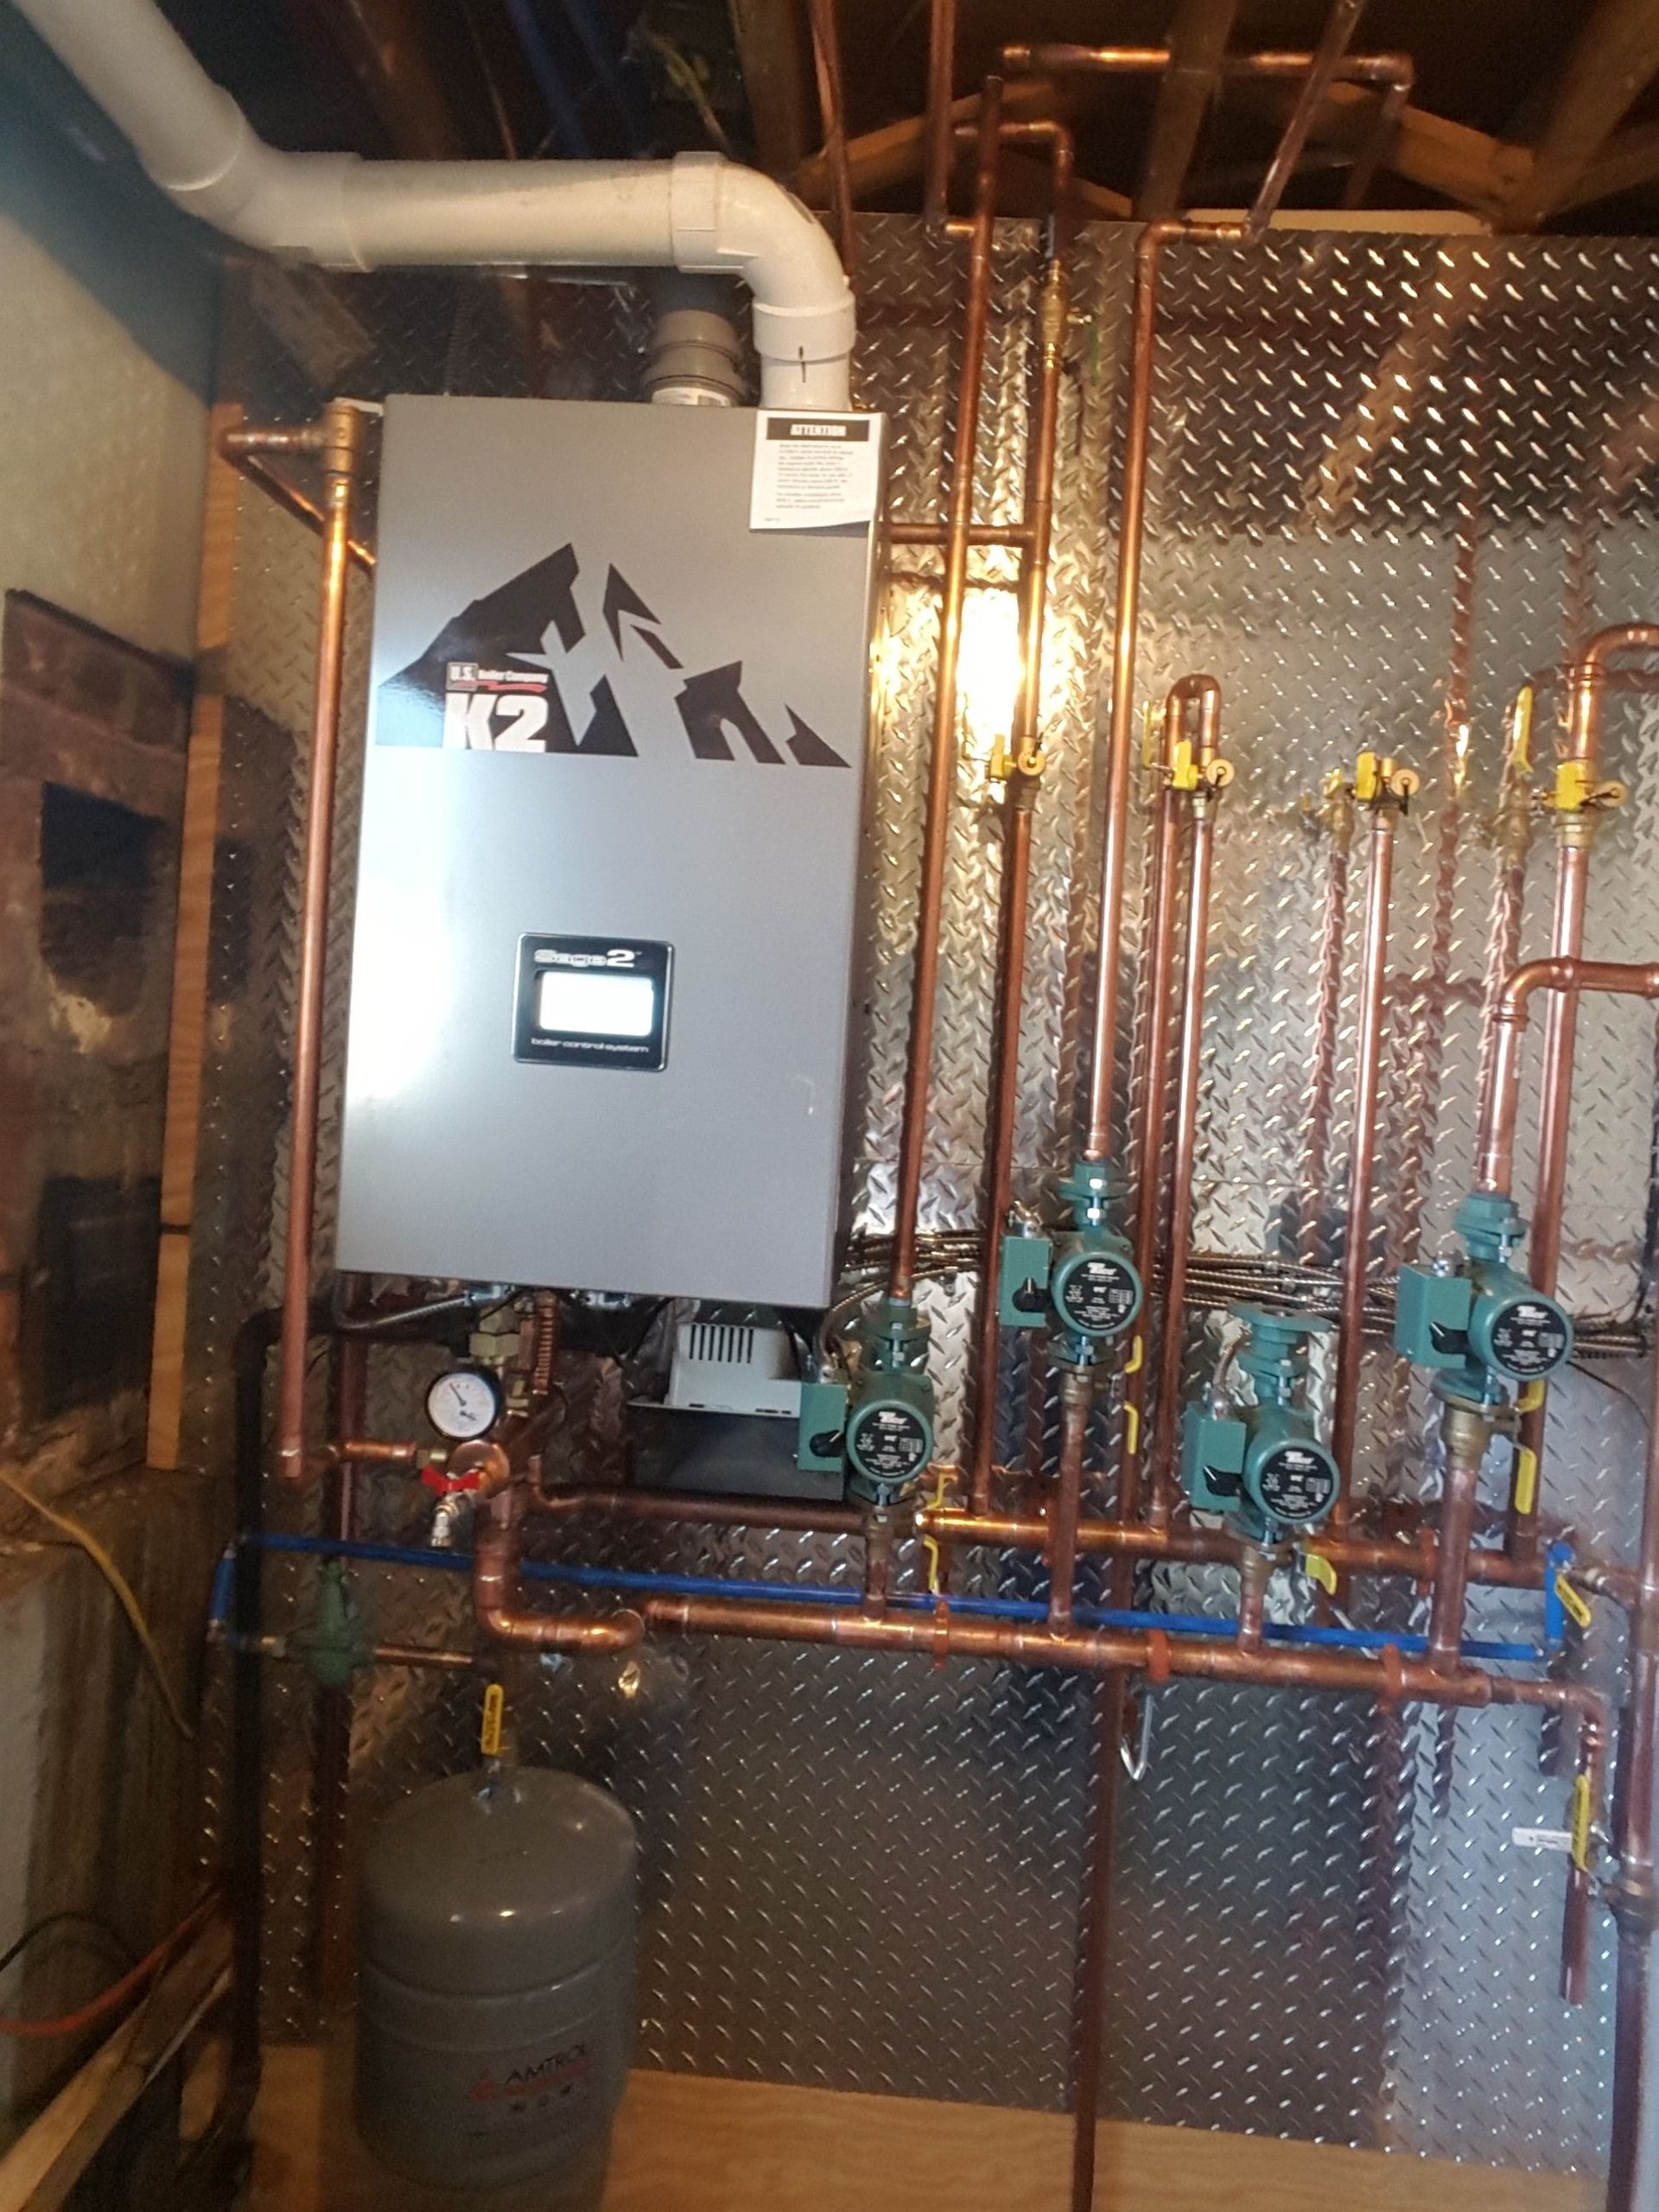 Commercial HVAC Service for a Business Property in the Bohemia, NY Area